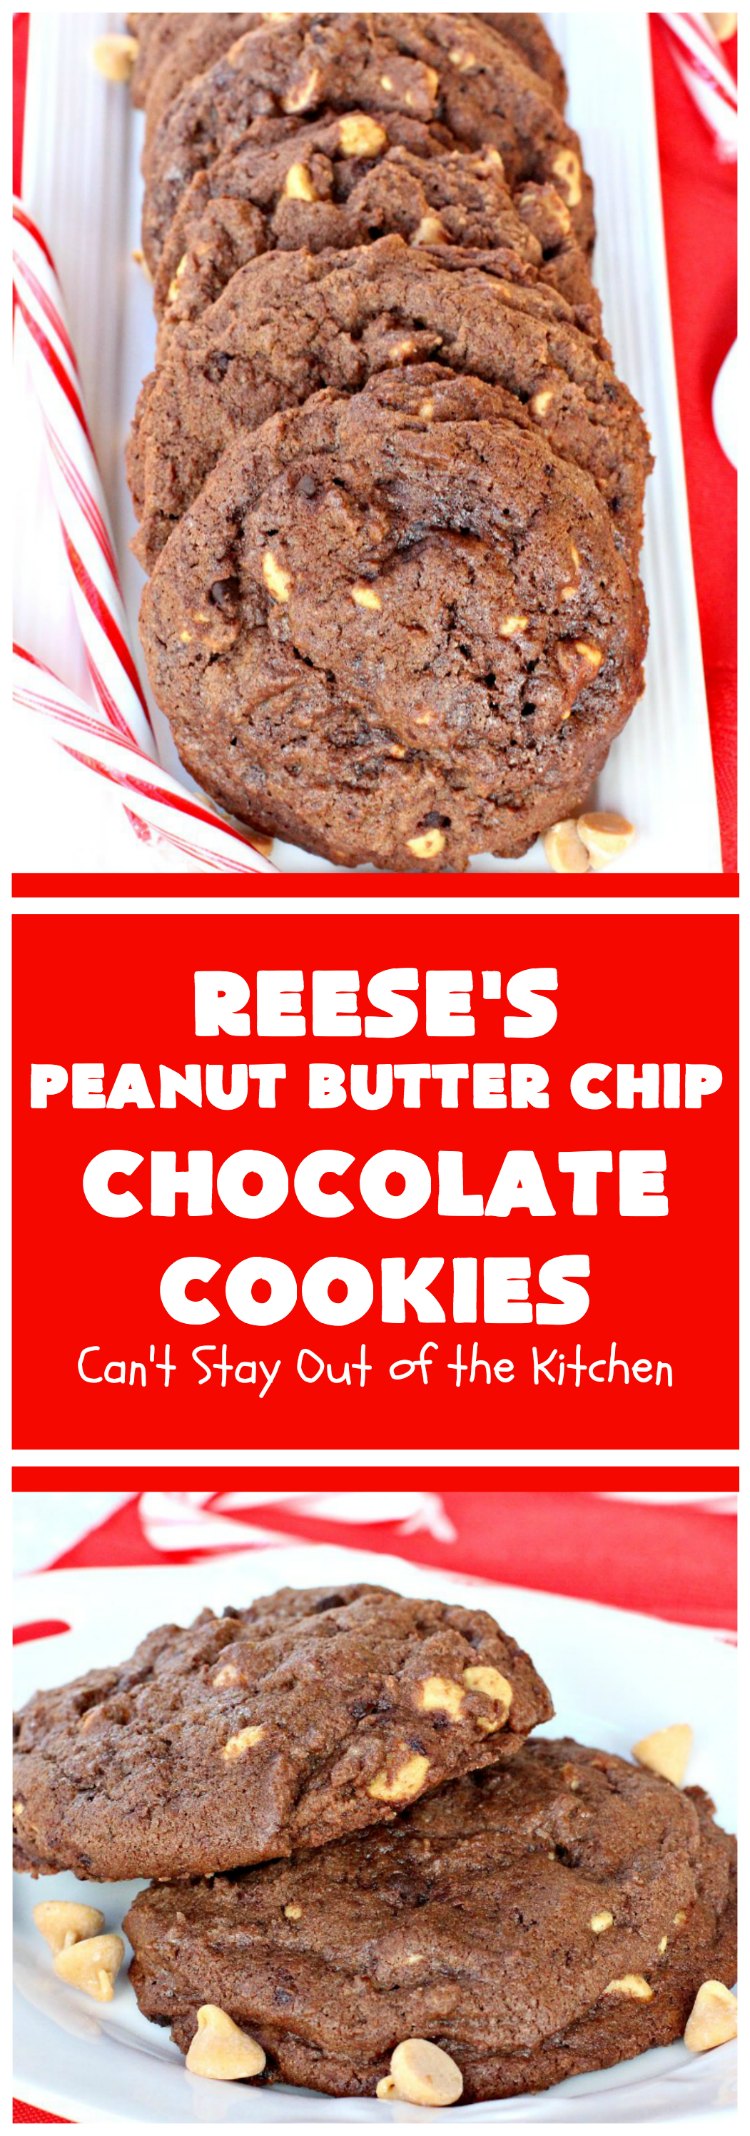 Reese's Peanut Butter Chip Chocolate Cookies | Can't Stay Out of the Kitchen